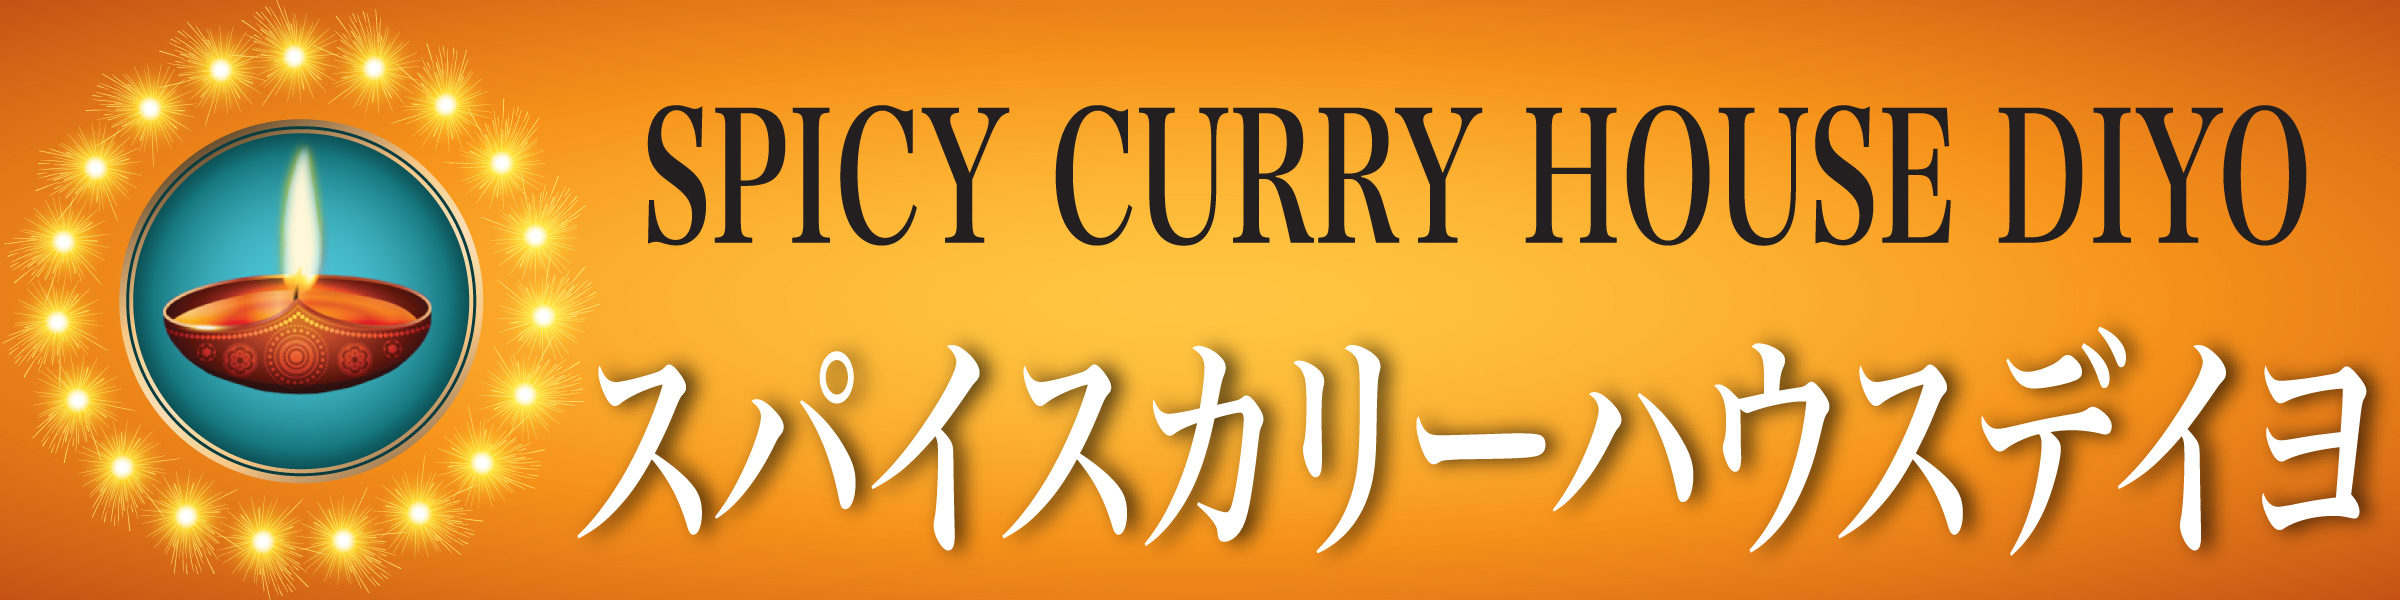 Spicy Curry House Diyo